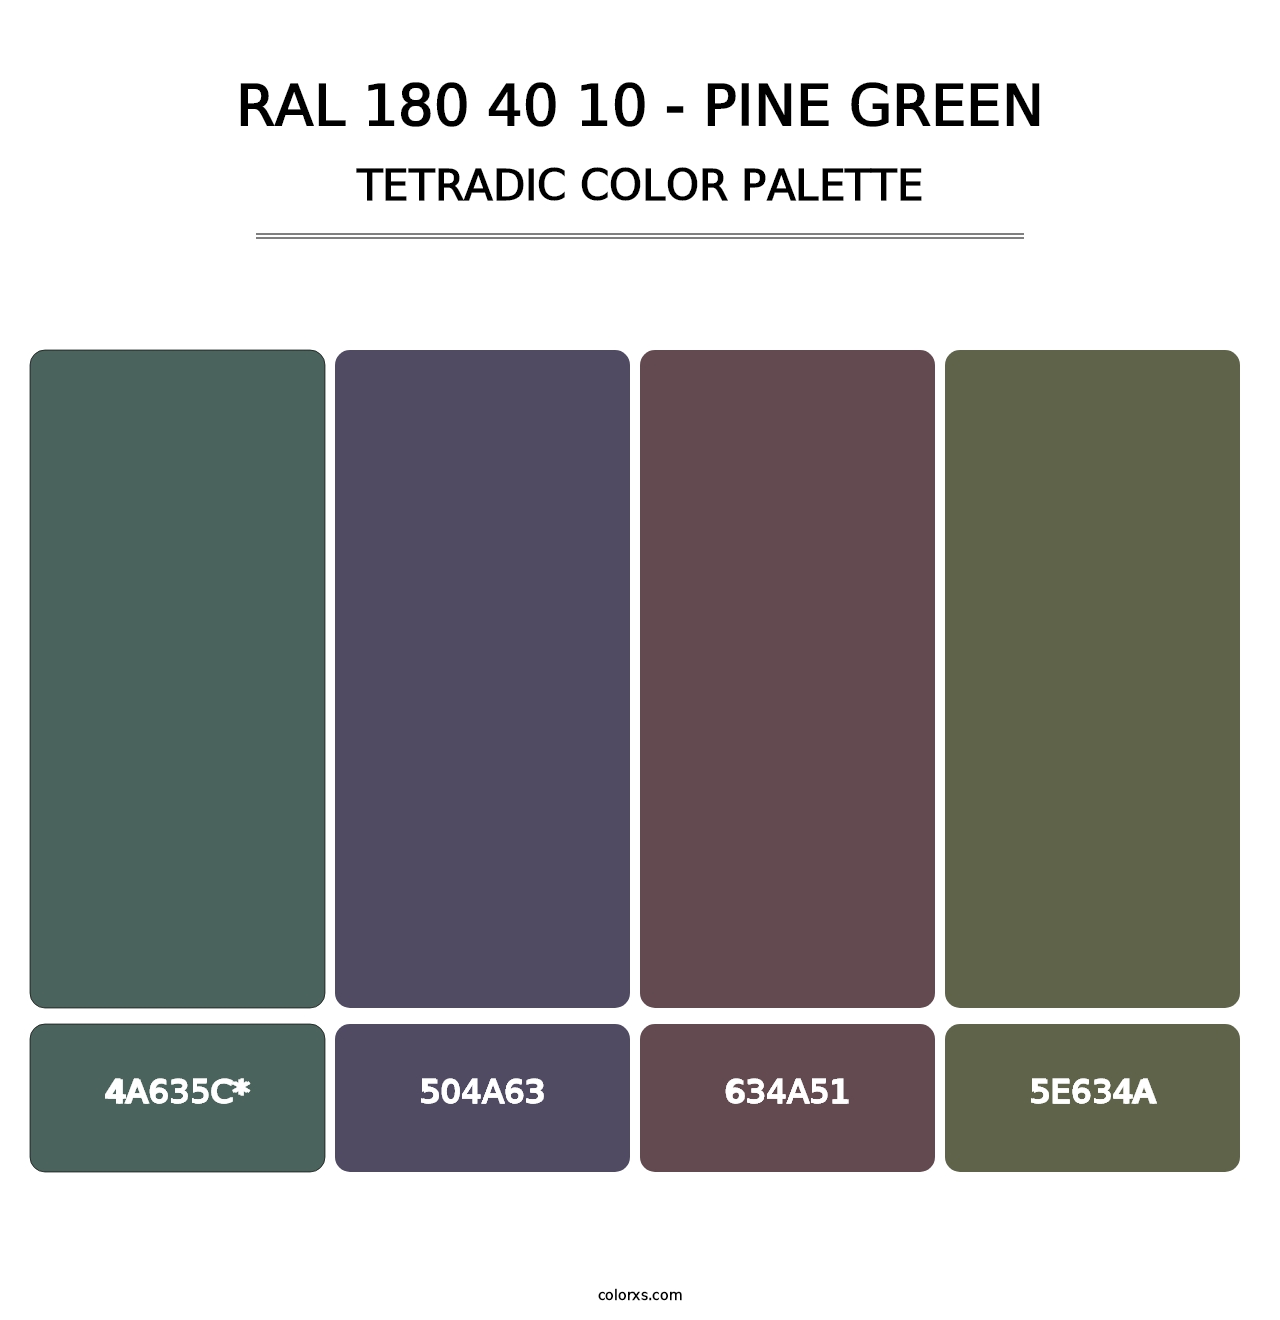 RAL 180 40 10 - Pine Green - Tetradic Color Palette